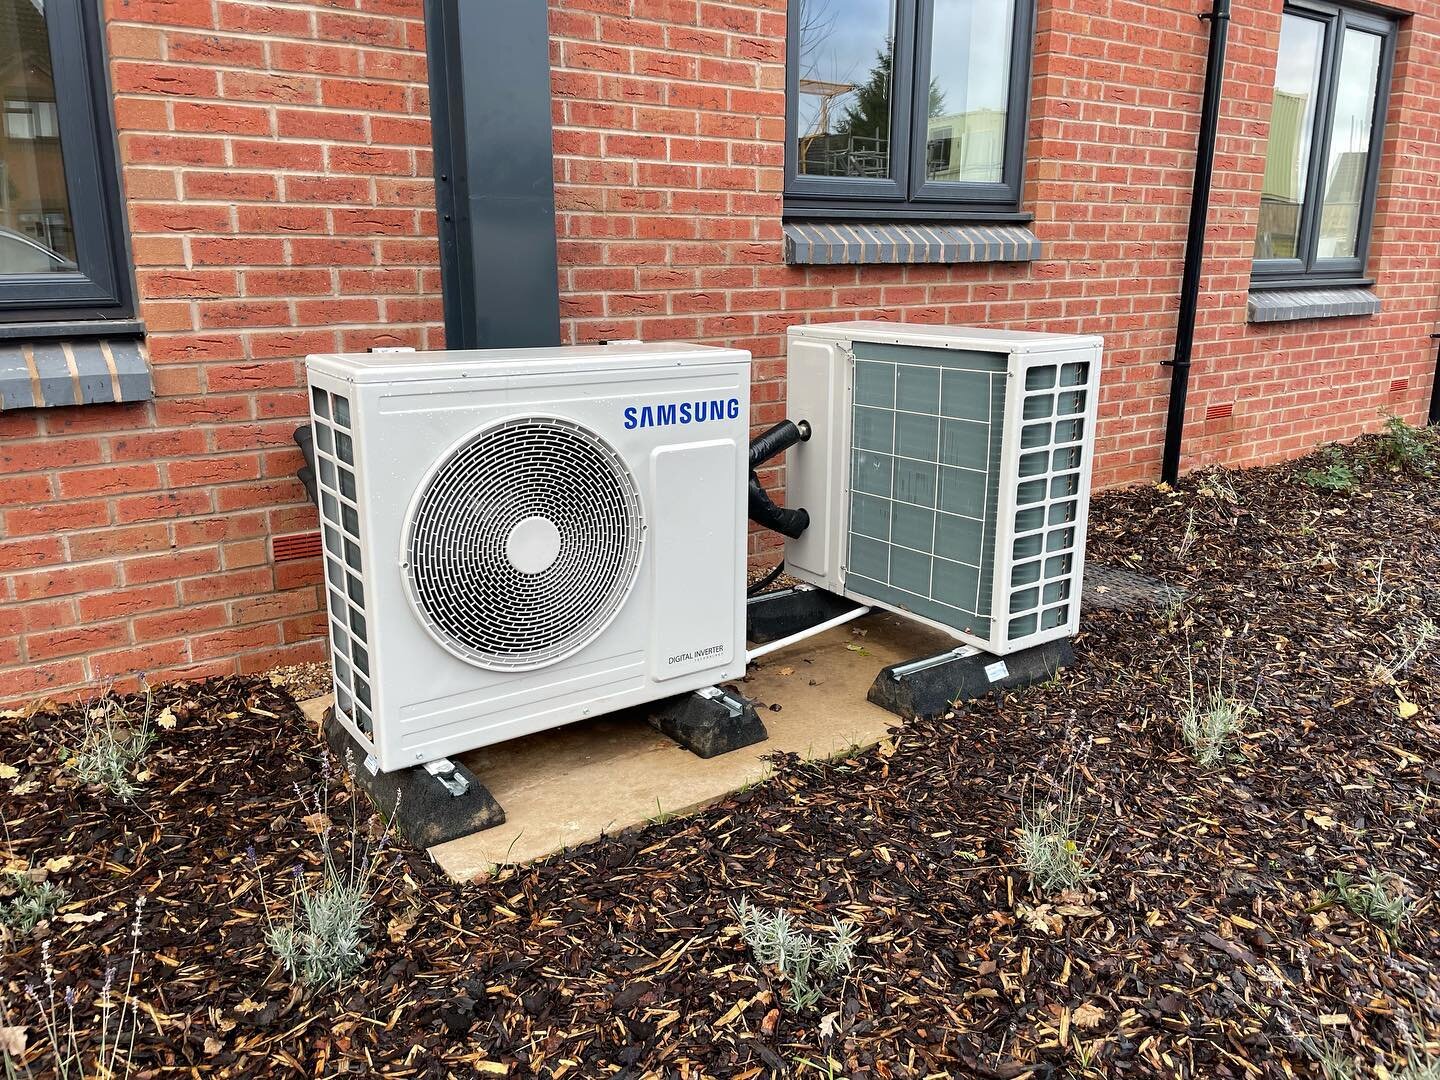 Double trouble! 2x Samsung air source heat pumps installed by the Legion Plumbing team on site in Leamington Spa. Part of the 20 we are installing there.

#airsourceheatpump #samsung #ashp #renewableenergy #ecofriendly #heating #plumbing @installerma